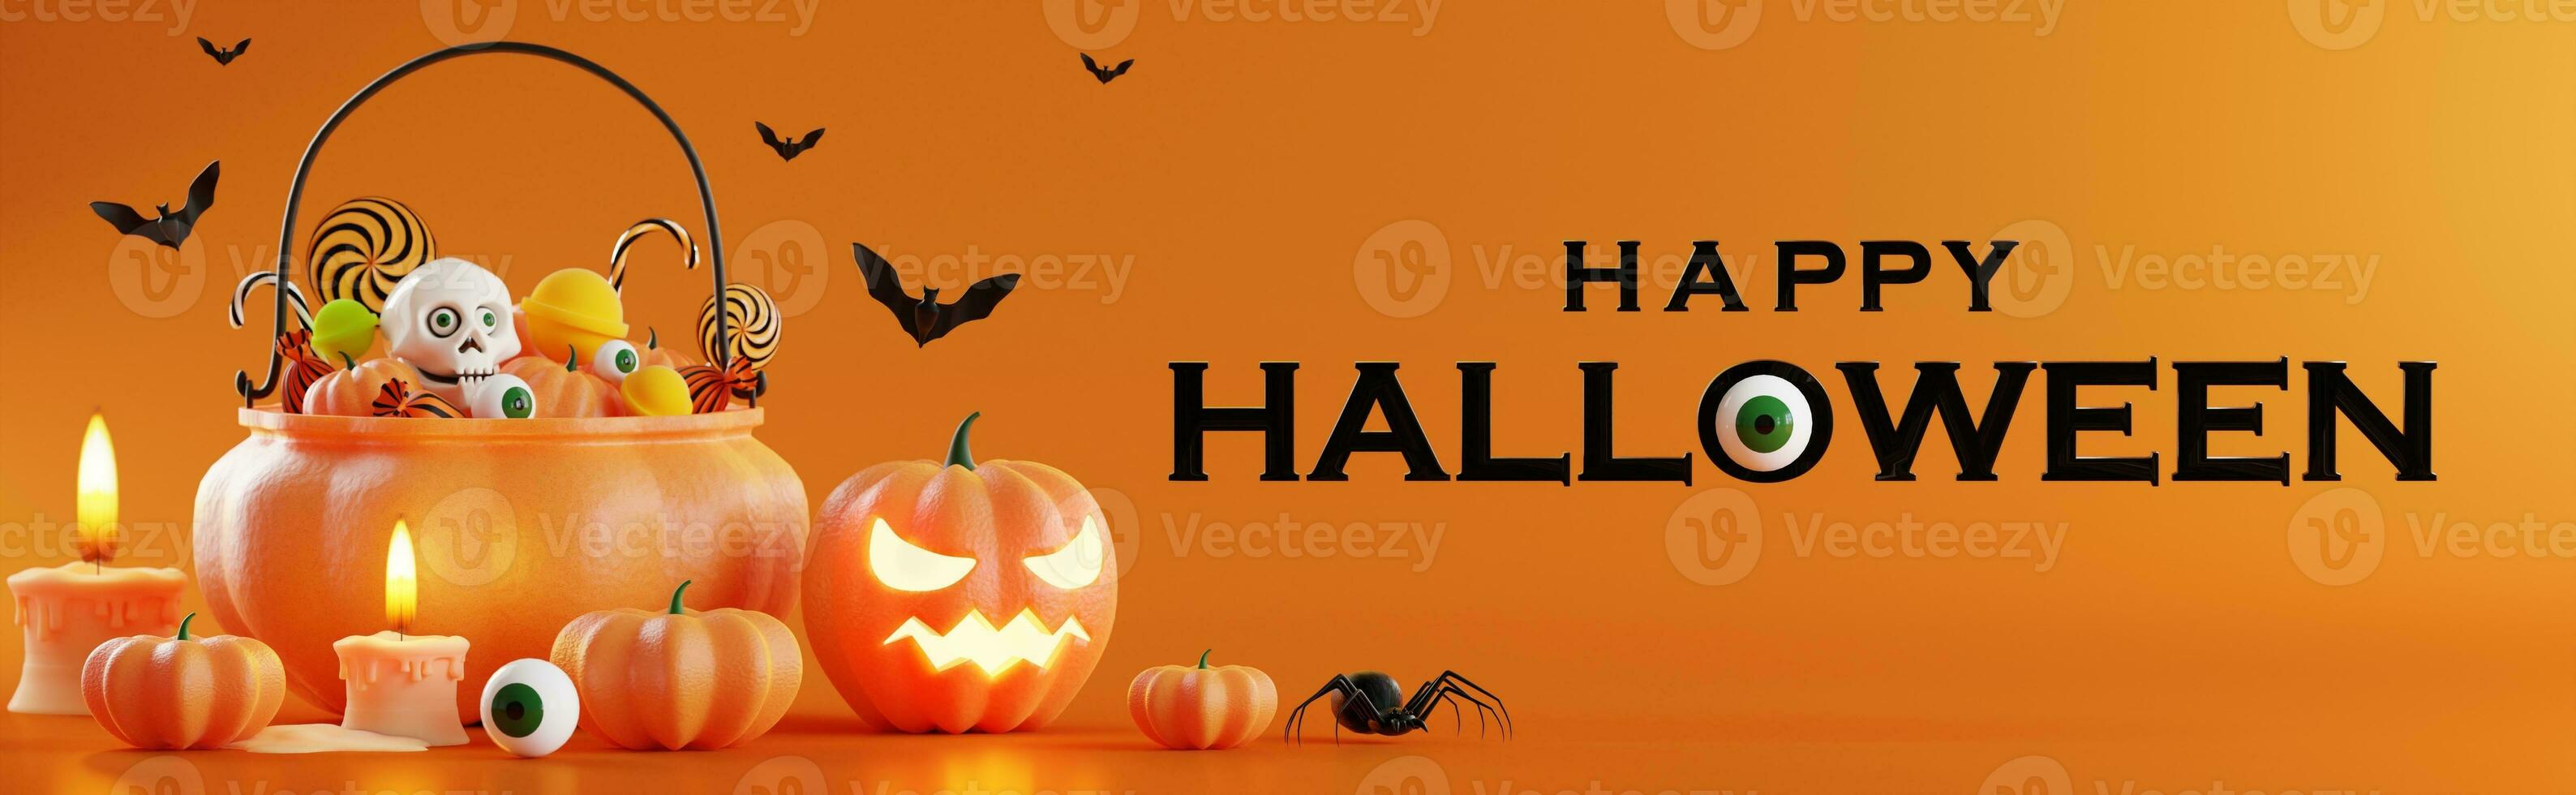 3d rendering illustration design for halloween banner with pumpkin,crucifix, skull, candle, candy, givebox ,grave on background. photo